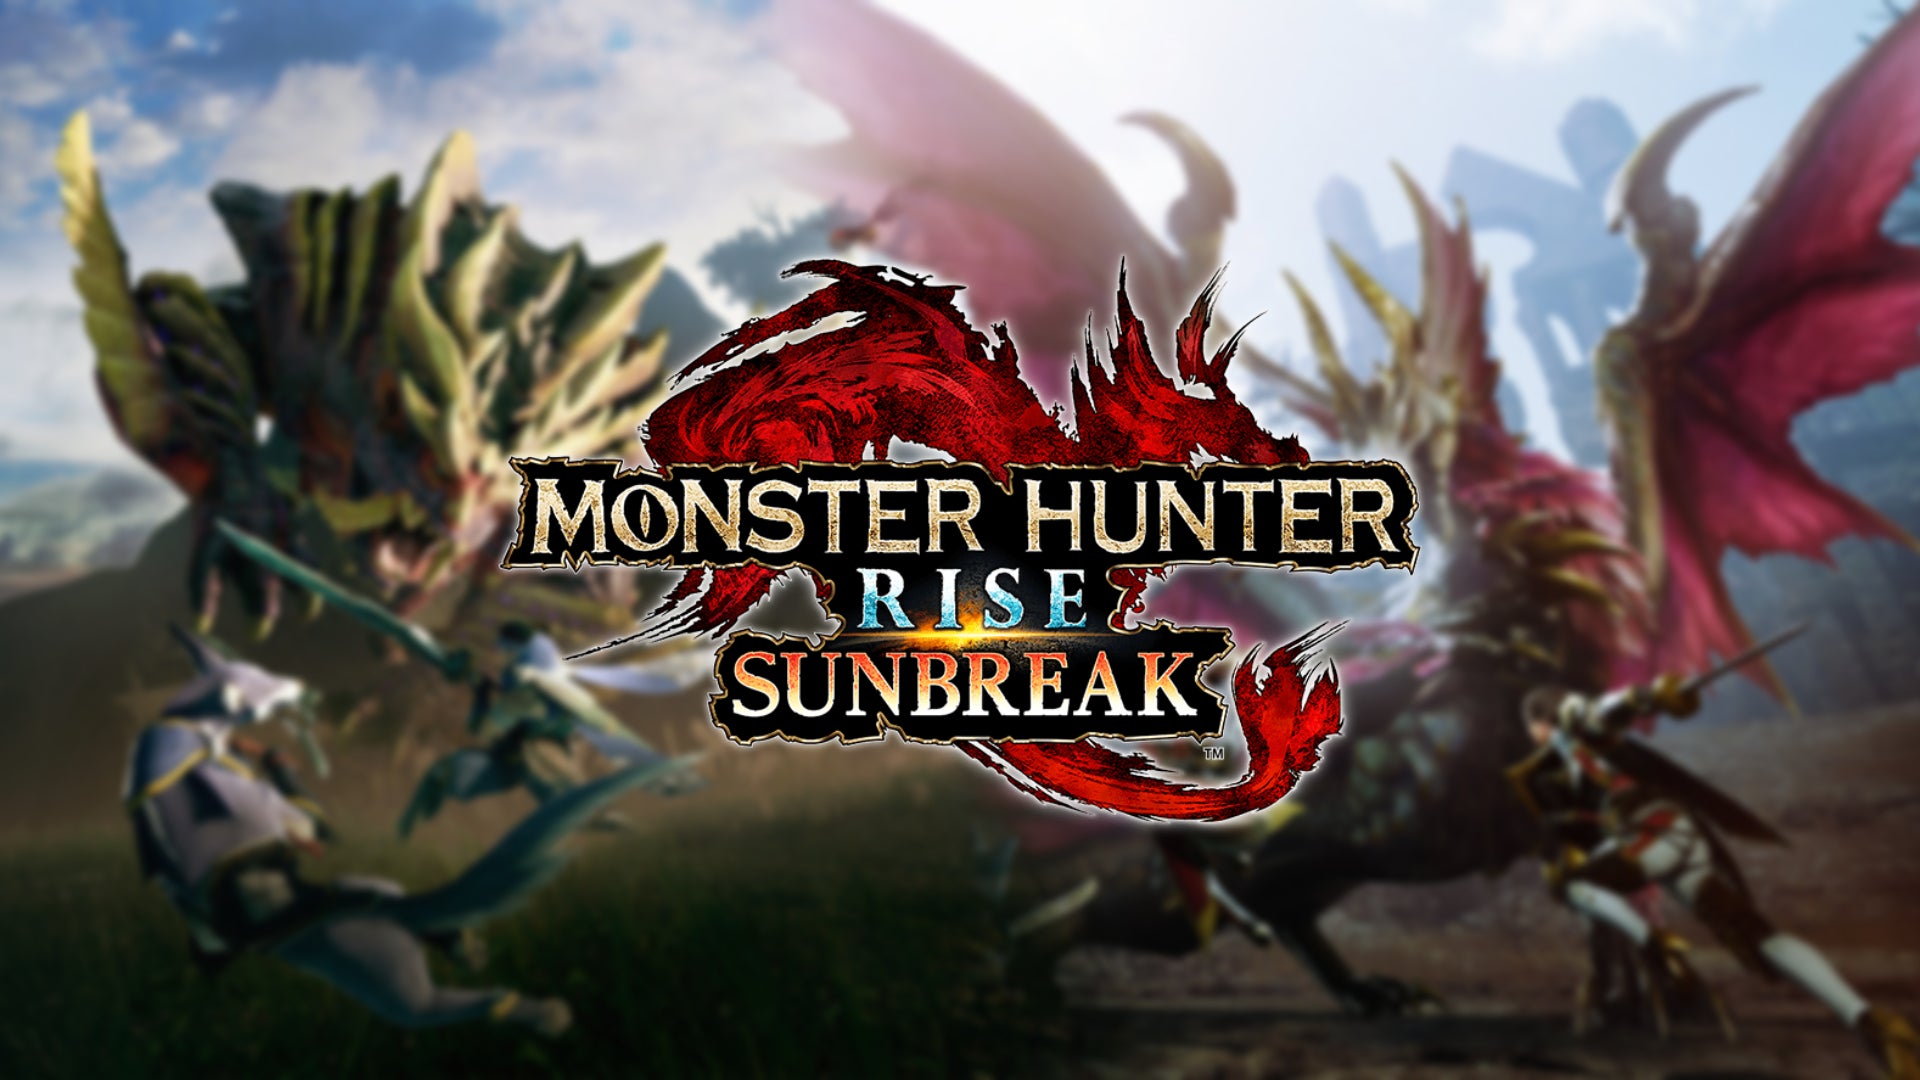 Image for Monster Hunter Rise: Sunbreak – Could this be the series' best expansion yet?